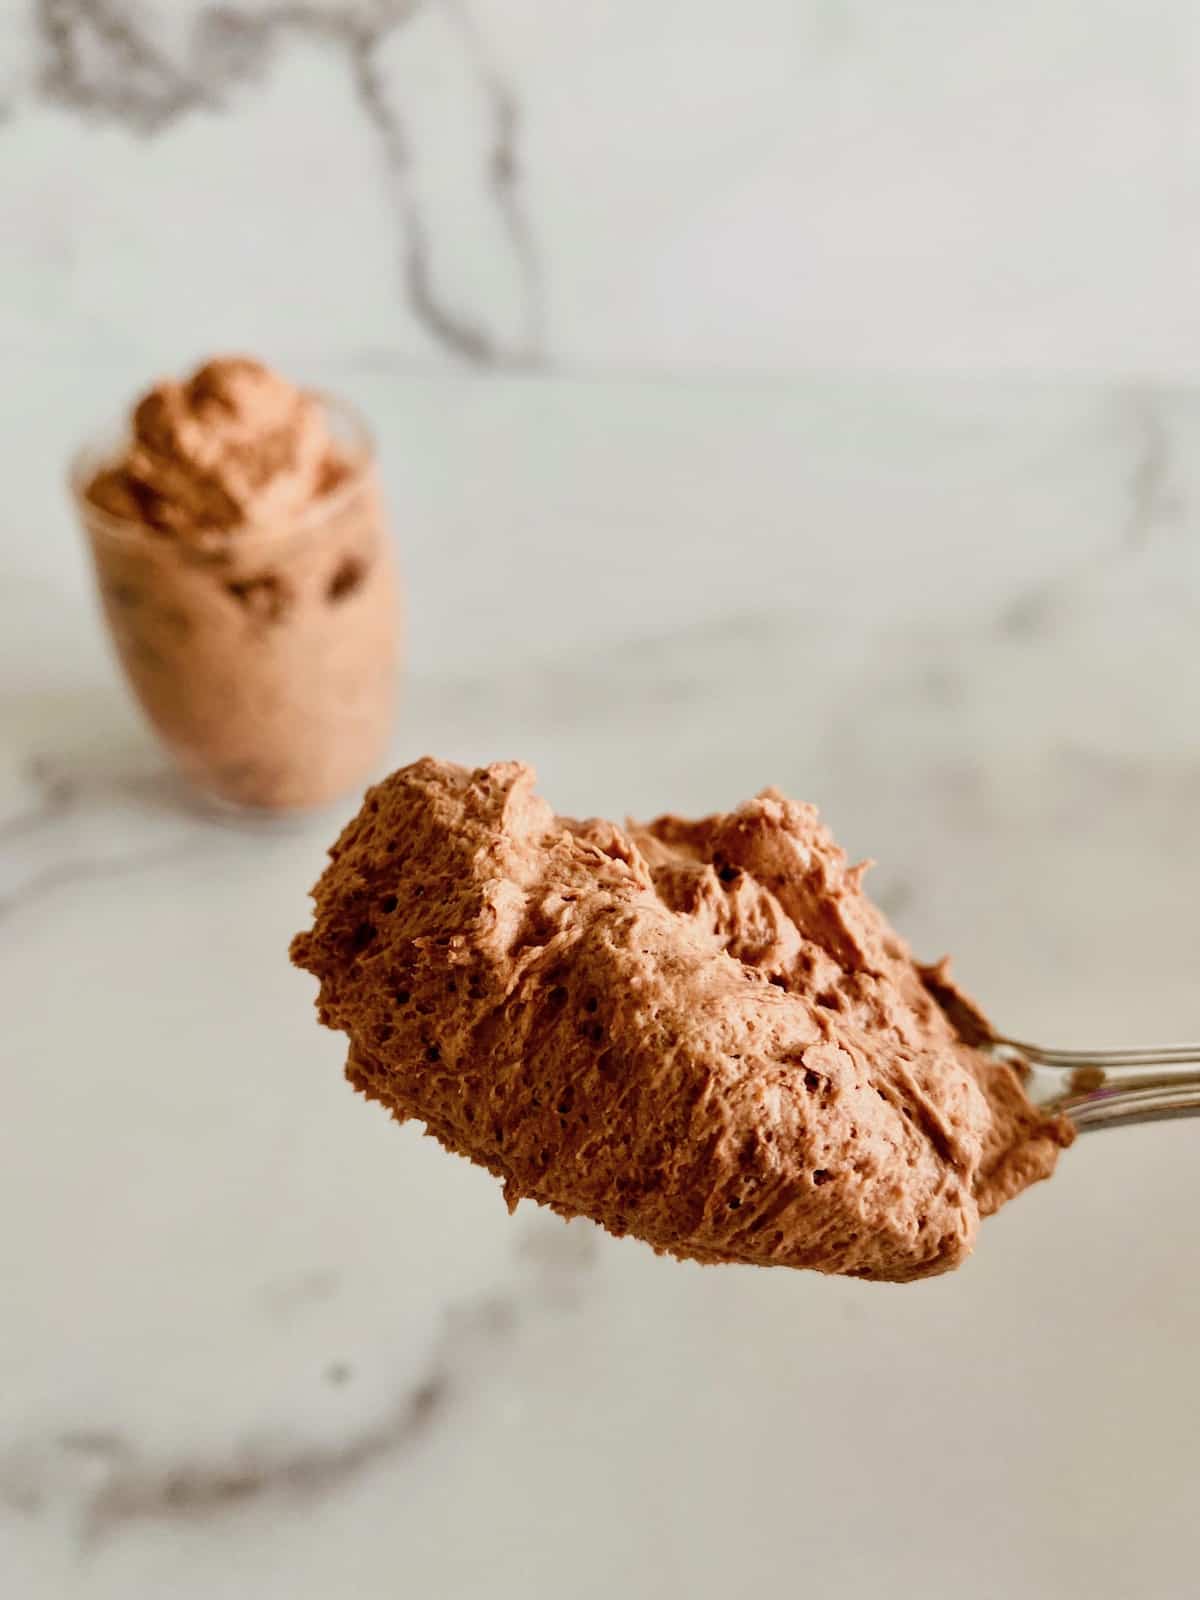 Easy Low-Carb Chocolate Mousse scooped on a spoon close up